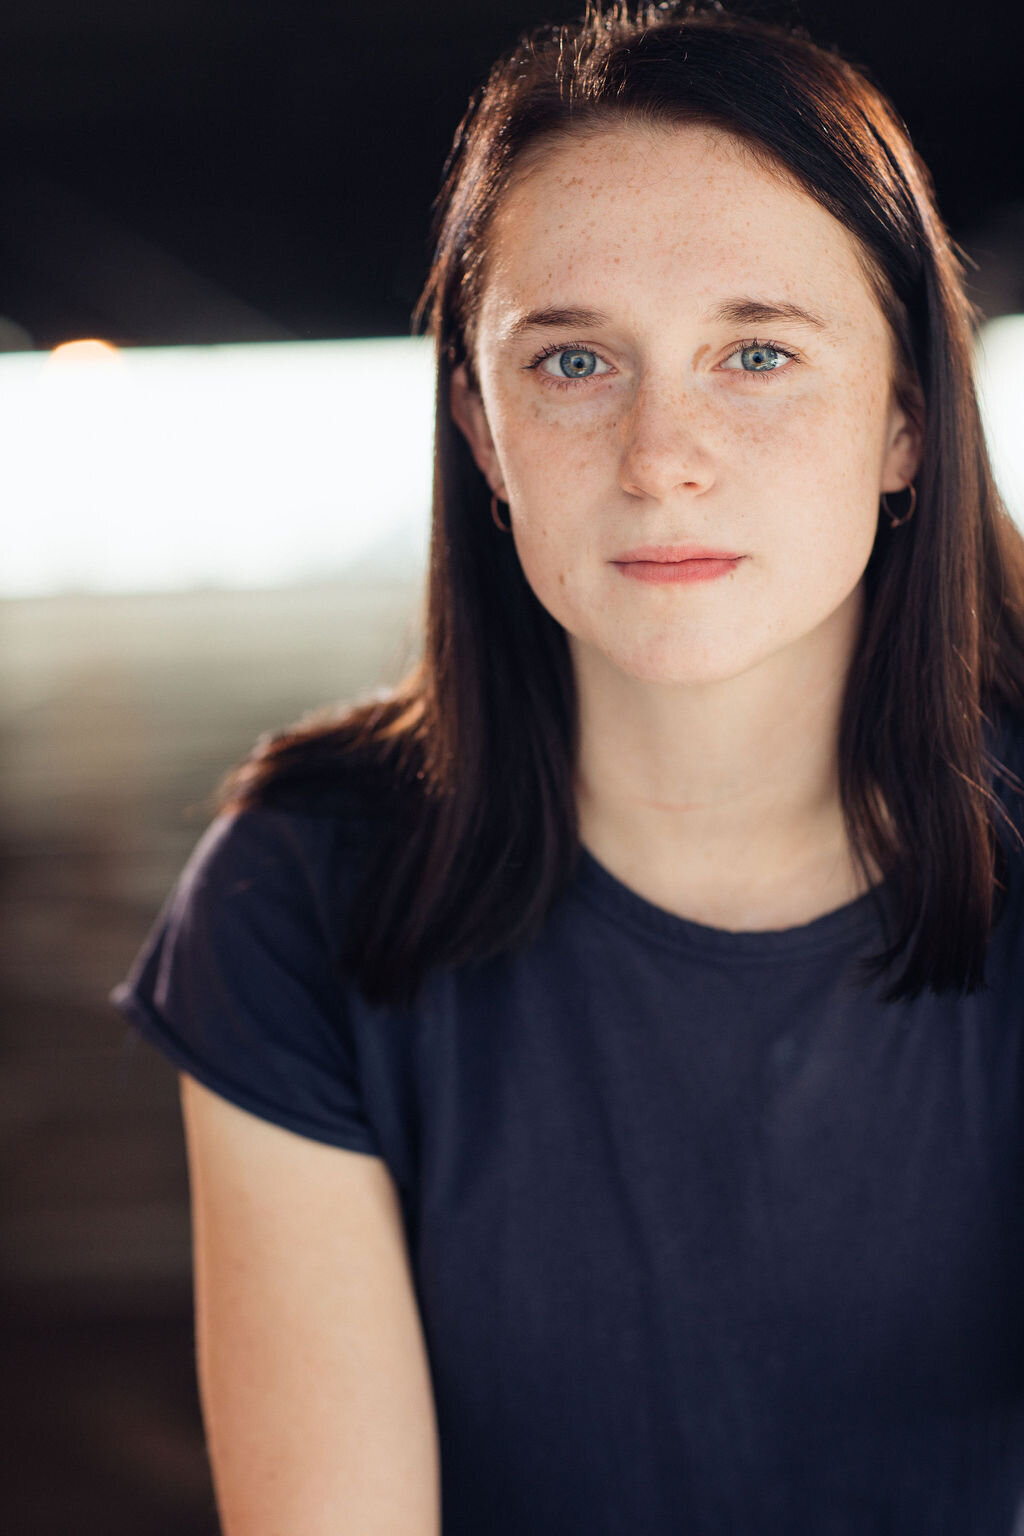 Headshot Photograph Of Young Woman In Dark Blue Shirt Los Angeles